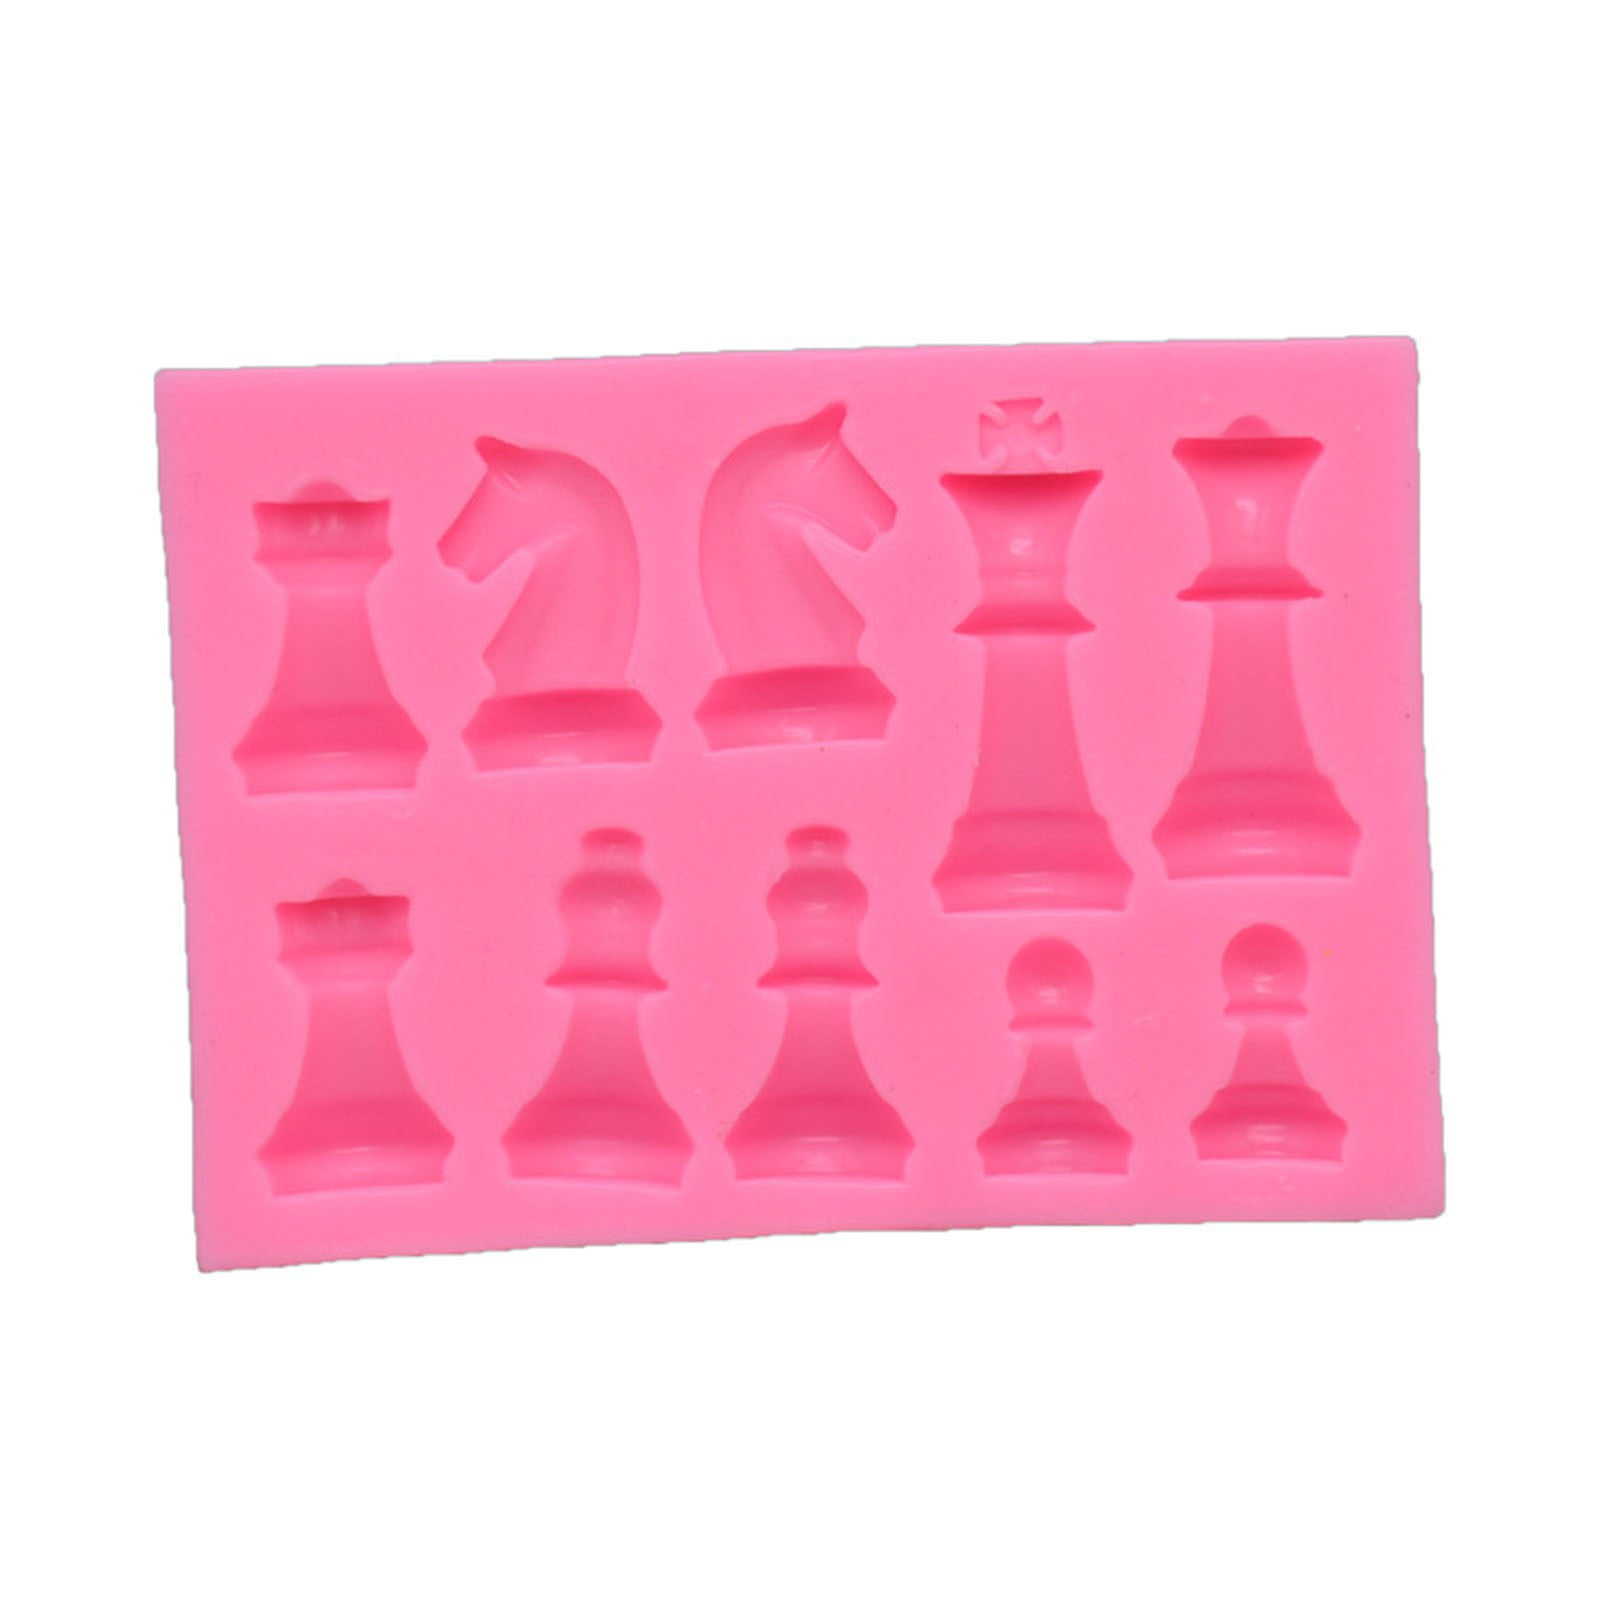 3D International Chess Mold Silicone Baking Tray DIY Cake Decor Ice Cube Mould 